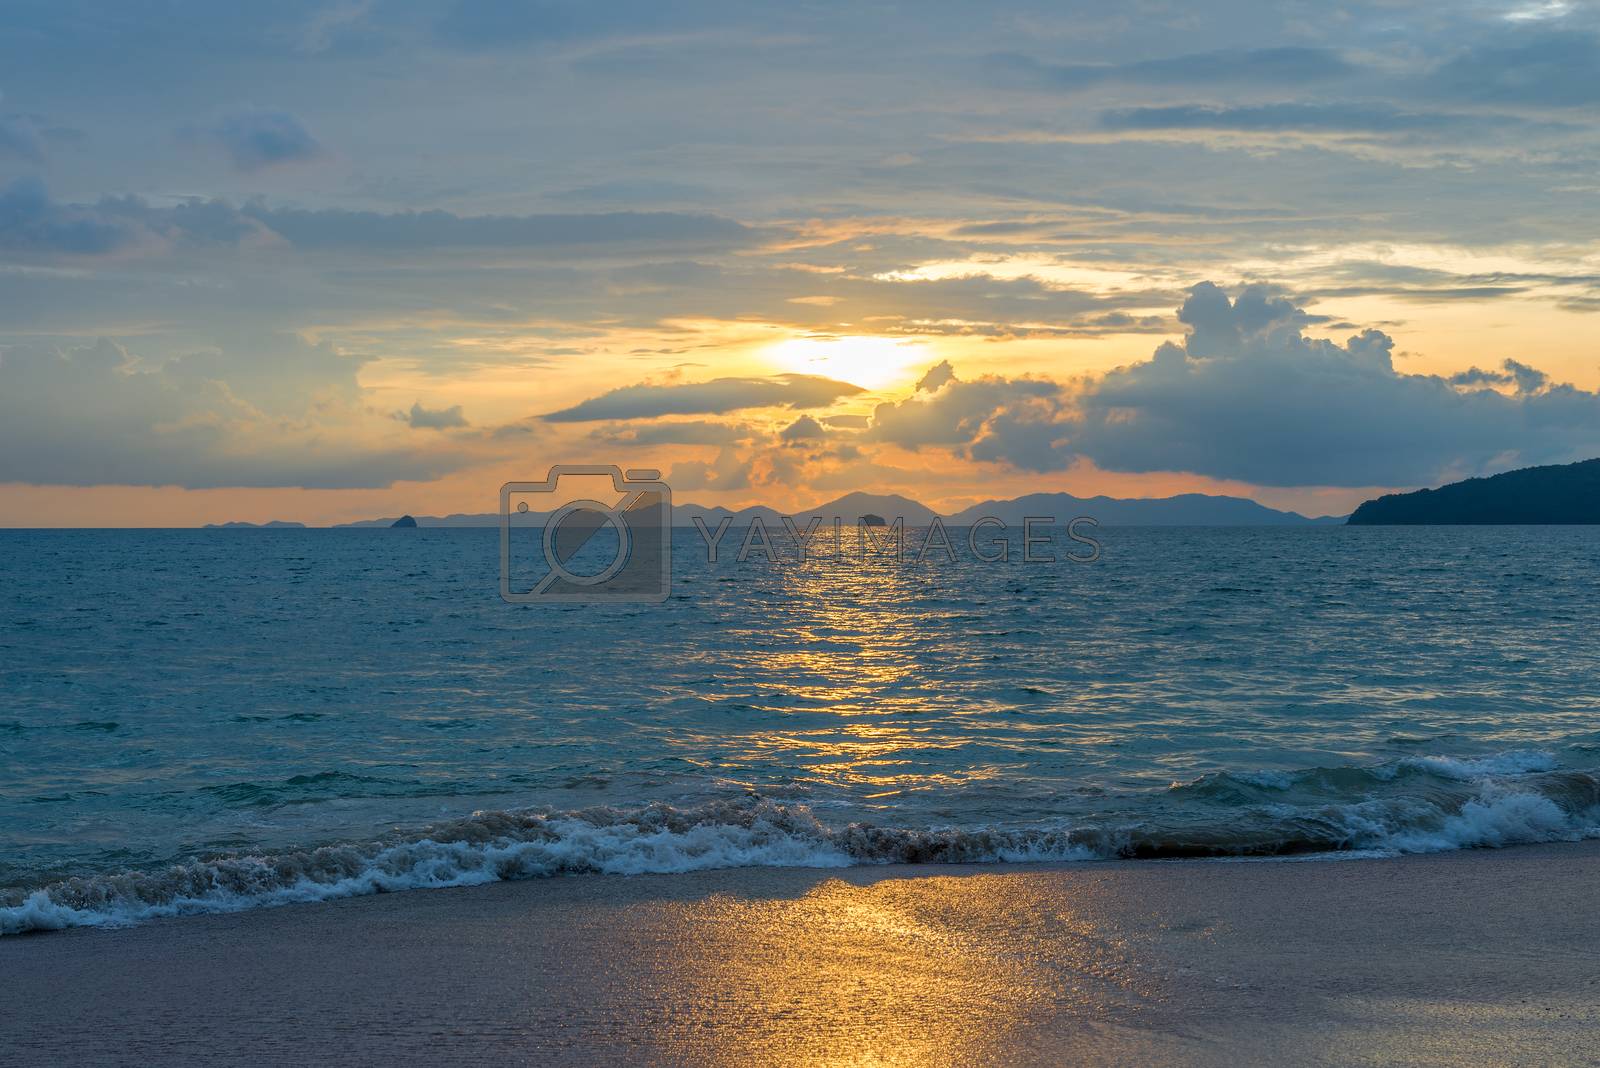 Royalty free image of clean beautiful sea in the rays of the setting sun with mountain by kosmsos111